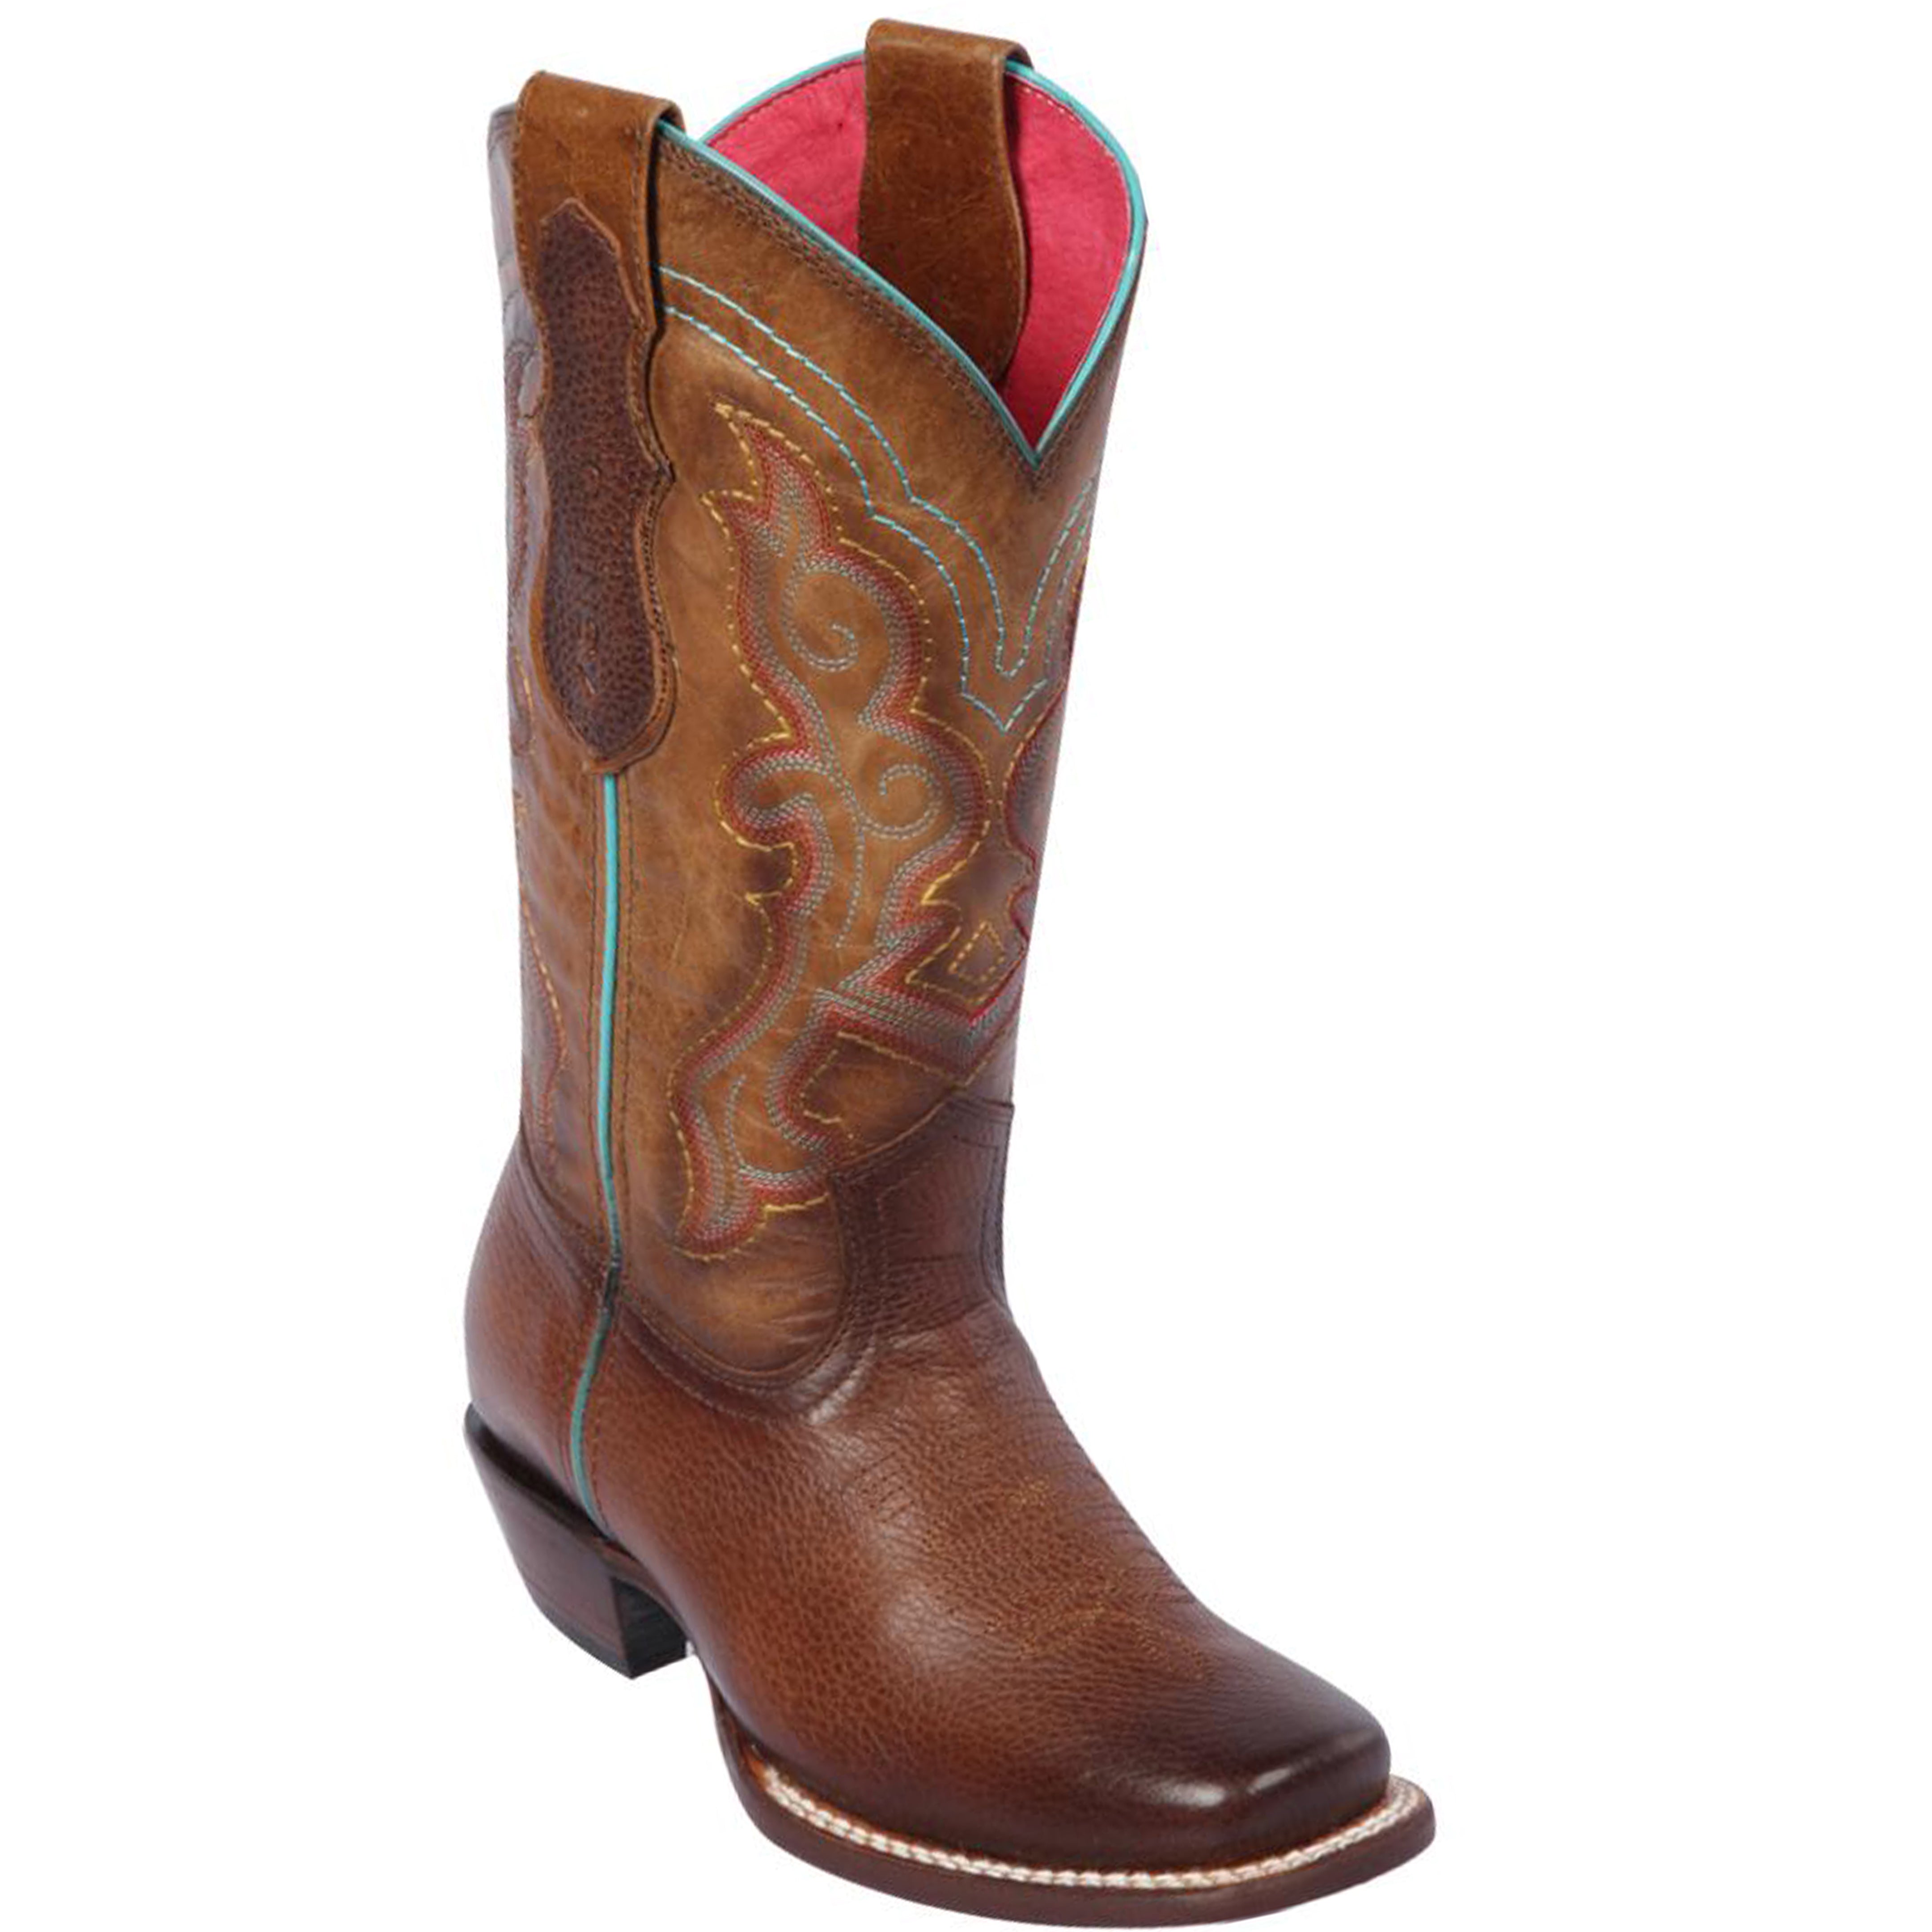 Quincy Cowgirl Boots For Women Cognac Square Toe